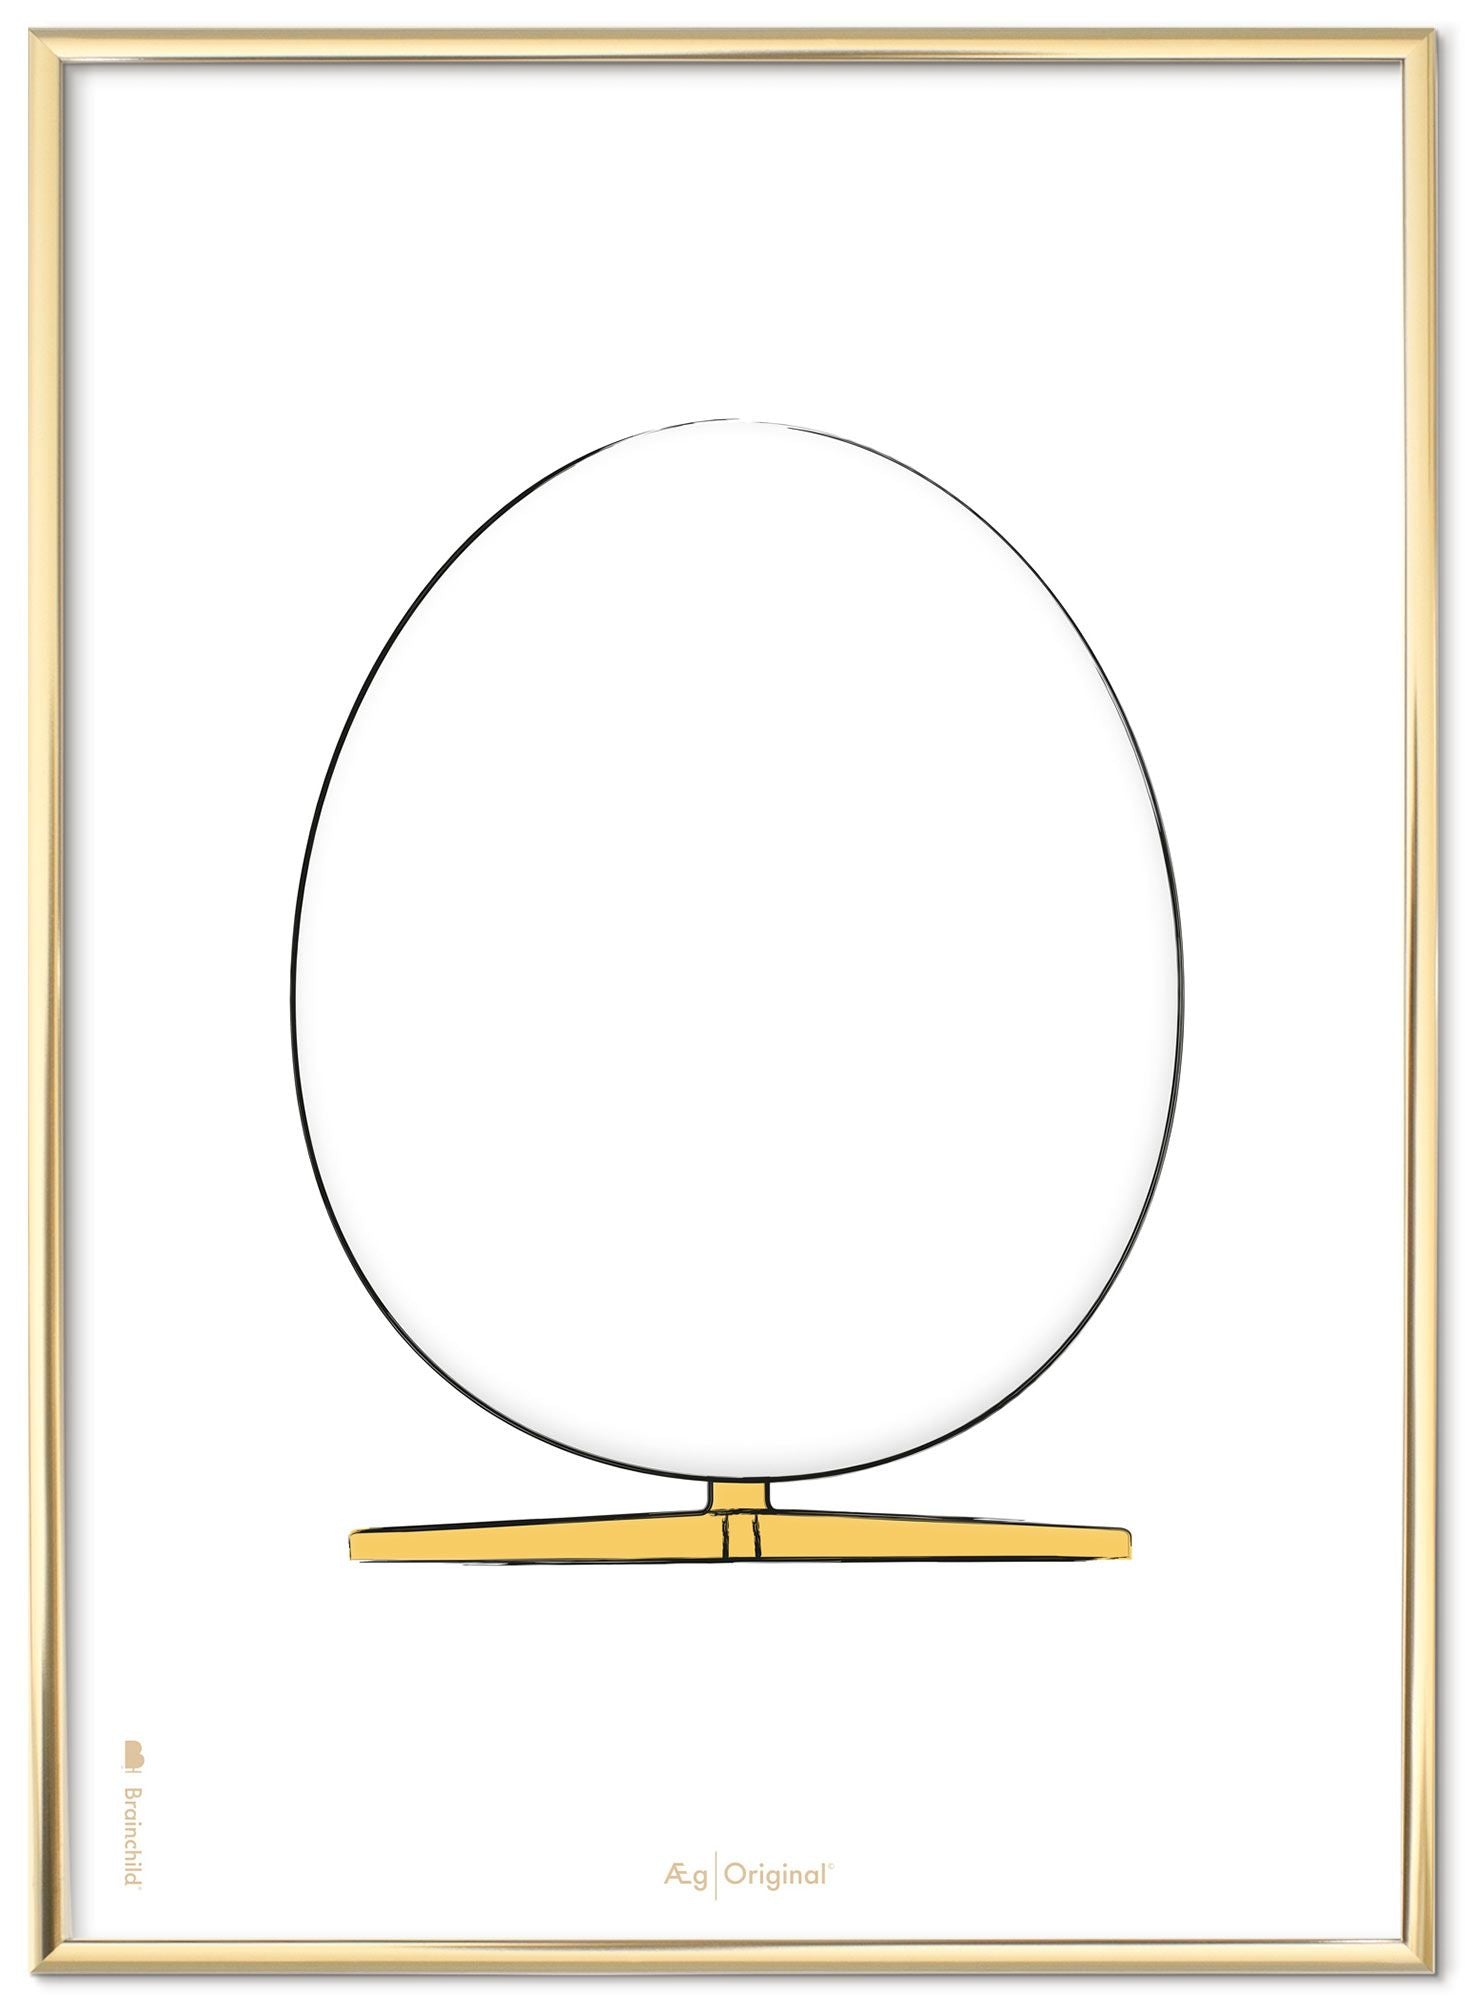 Brainchild The Egg Design Sketch Poster Frame Made Of Brass Colored Metal 70x100 Cm, White Background